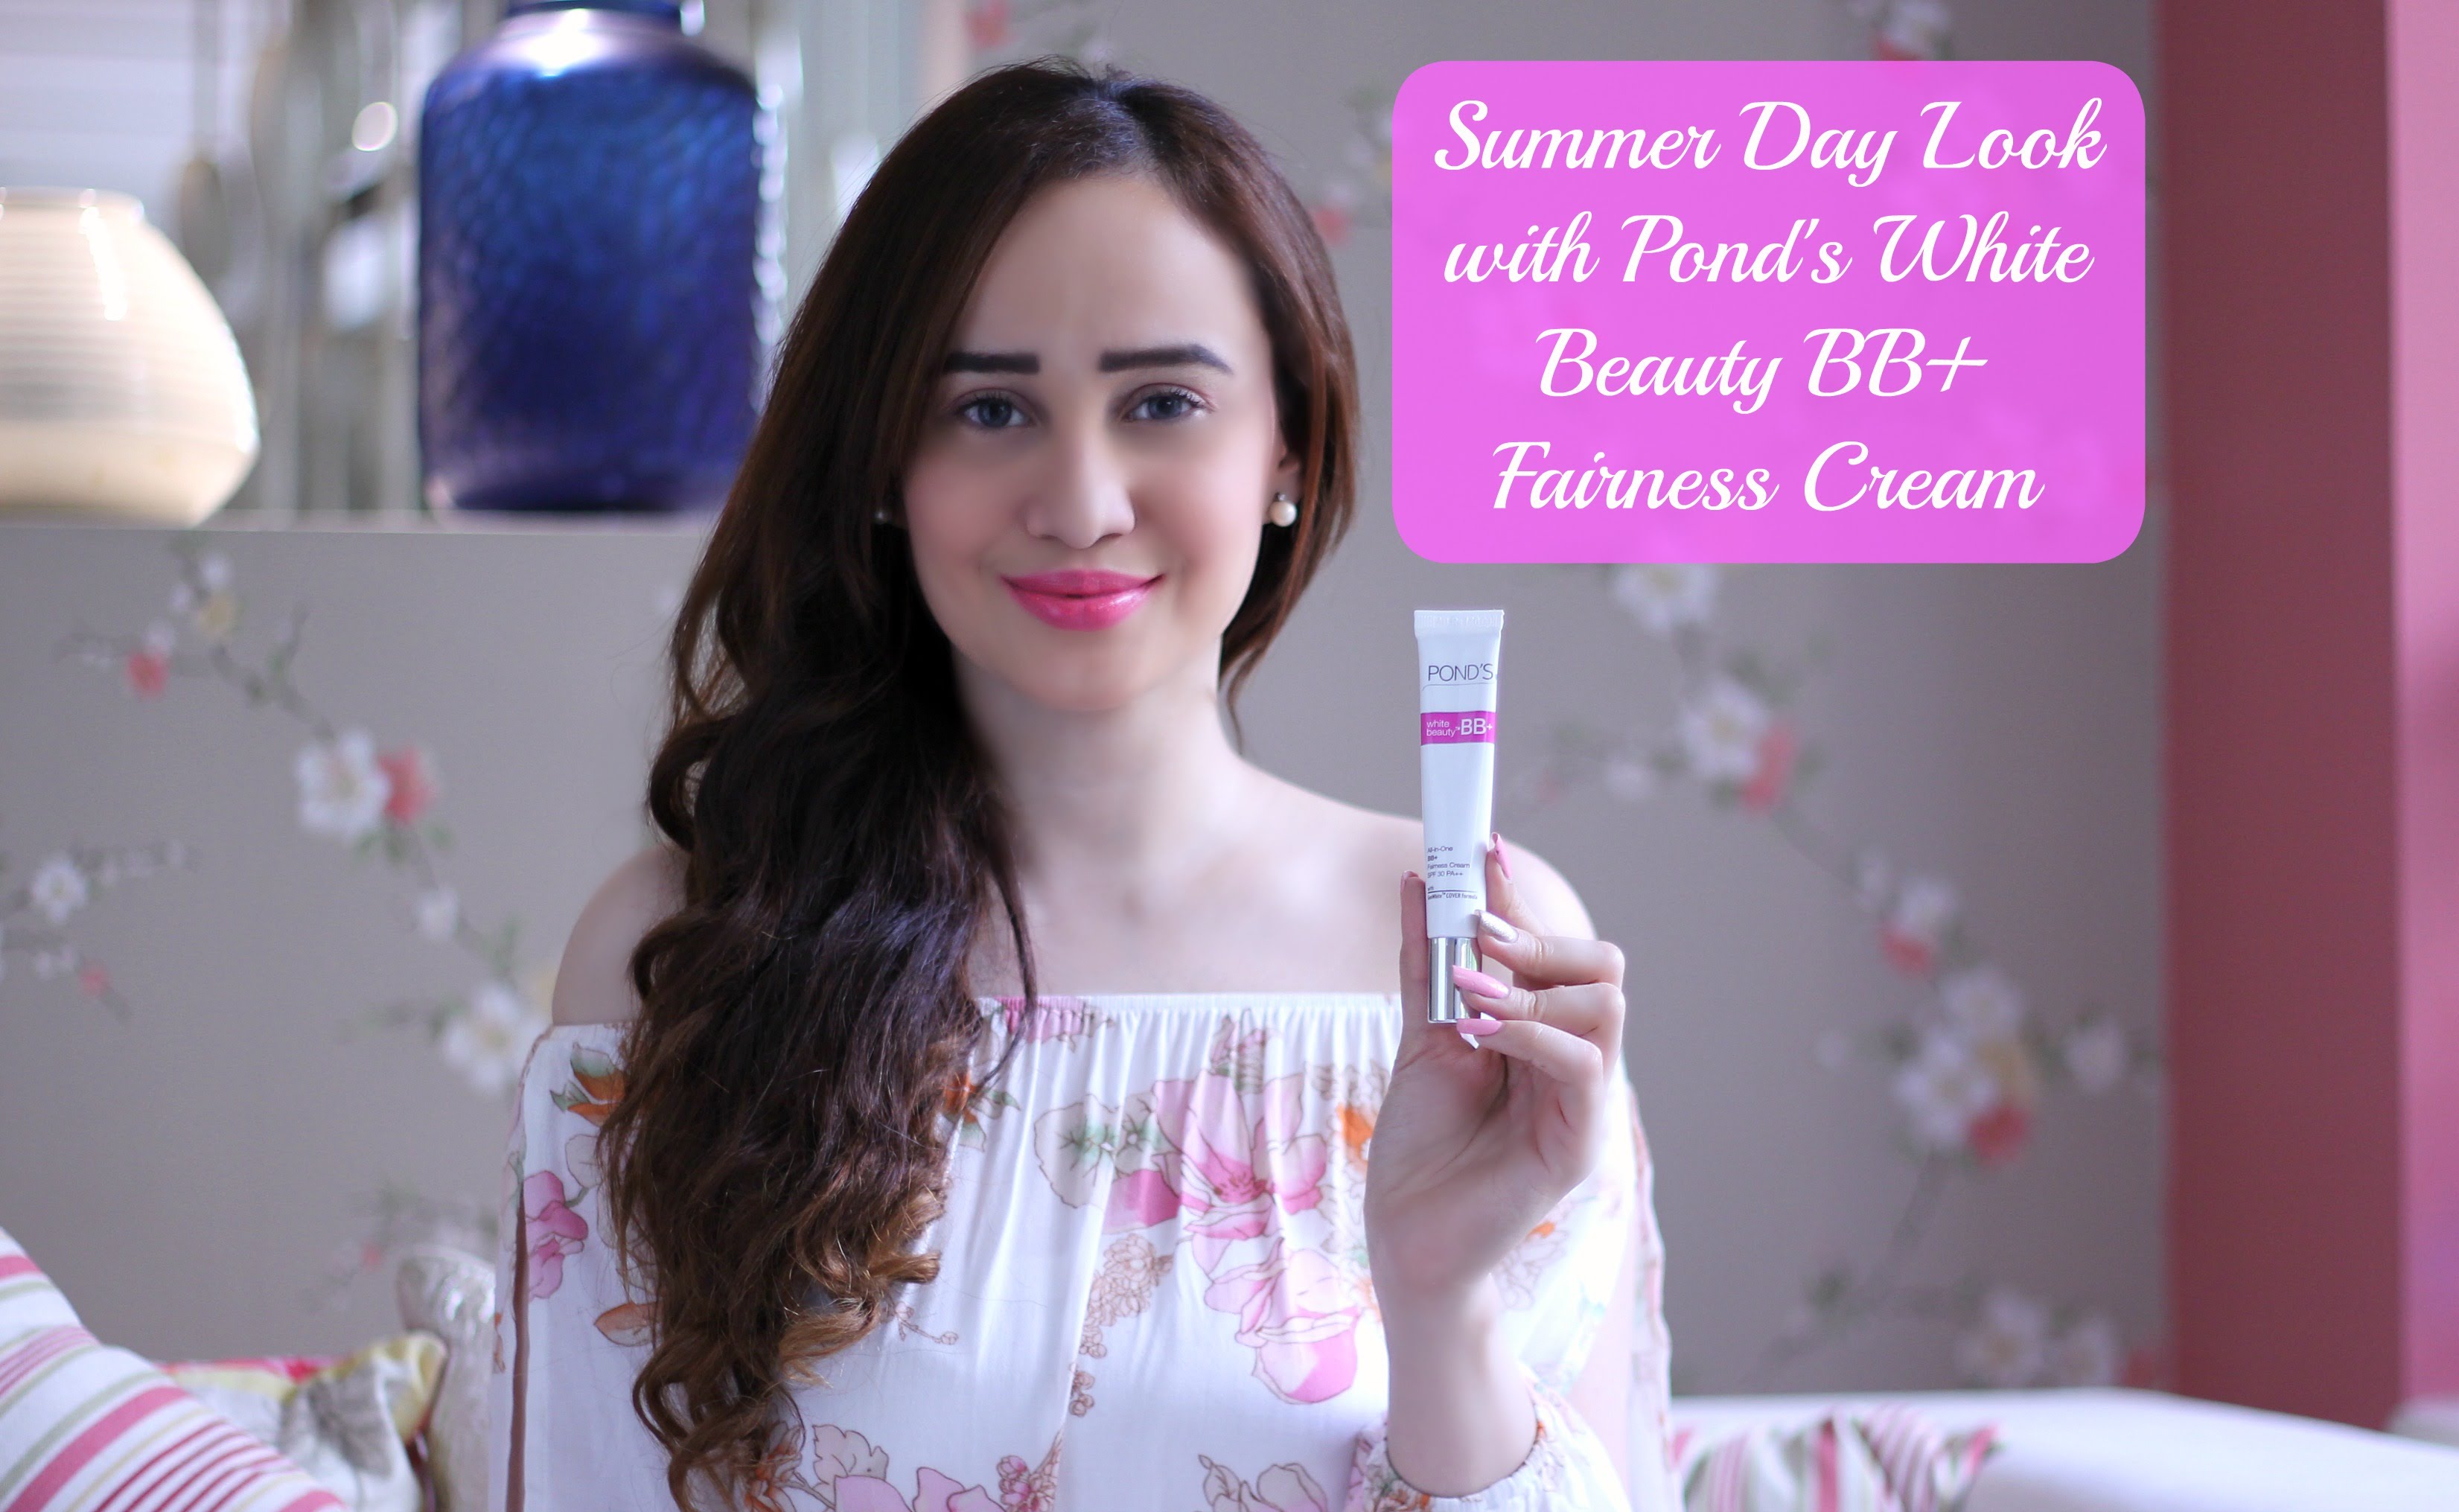 Summer Day Look with the Pond's White Beauty BB+ Fairness Cream ...